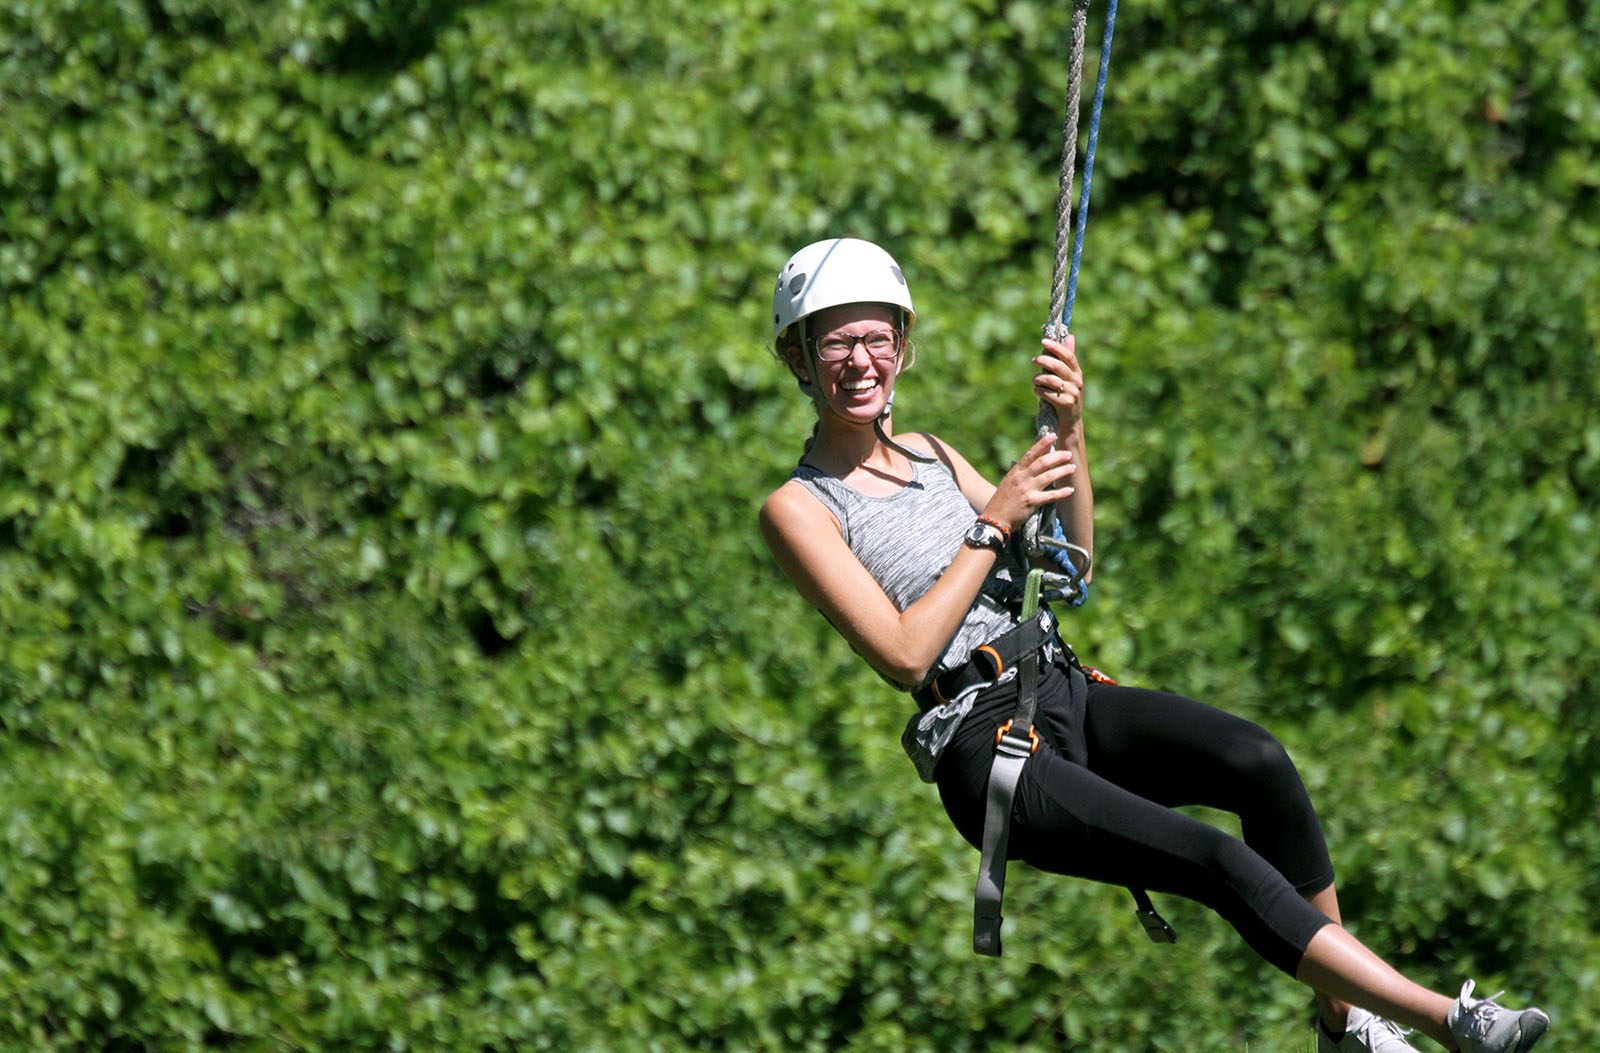 Macy Brown of Aurora soars through the Nebraska National Forest near Halsey on a zip line during UNK’s First Adventure summer camp. The program gives incoming UNK freshmen a chance to learn more about campus and each other before classes begin. (Photo by Tyler Ellyson, UNK Communications)